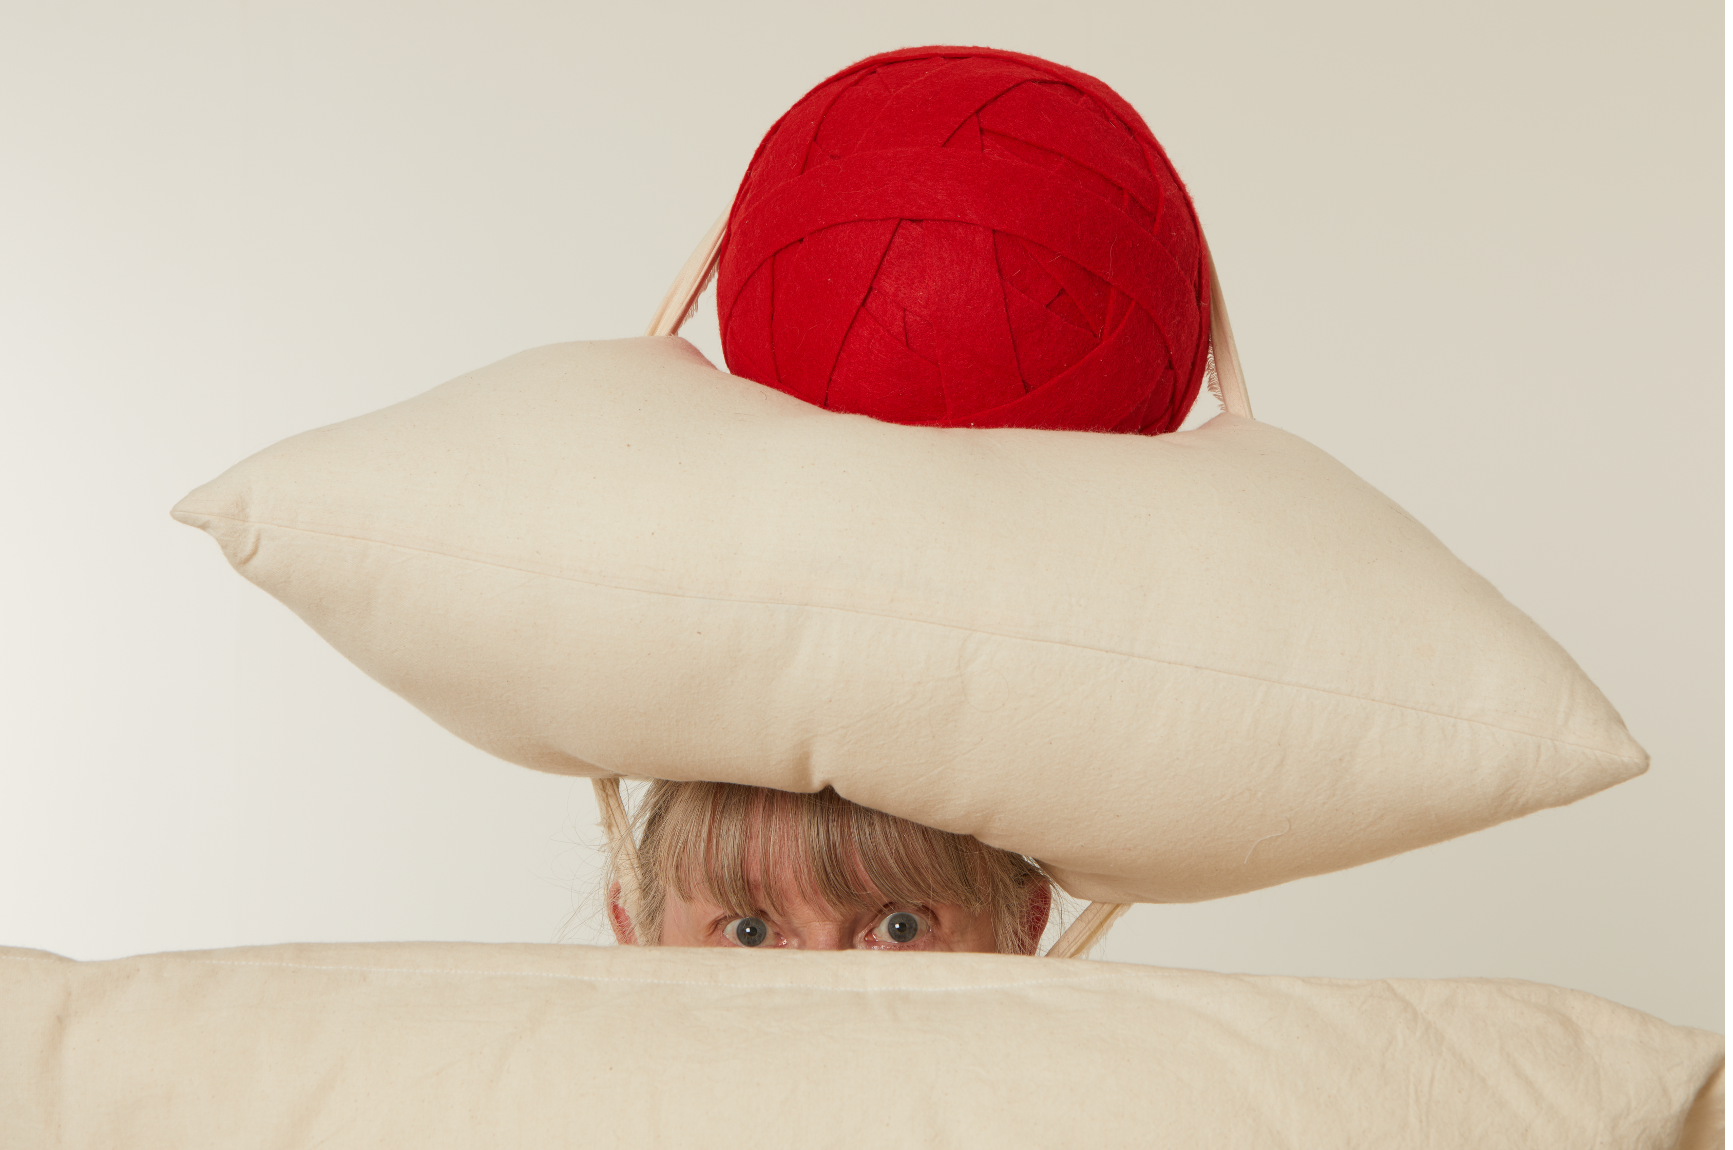 image of woman peeking out from underneath a hat shaped like a pillow with a red ball on top of the hat.